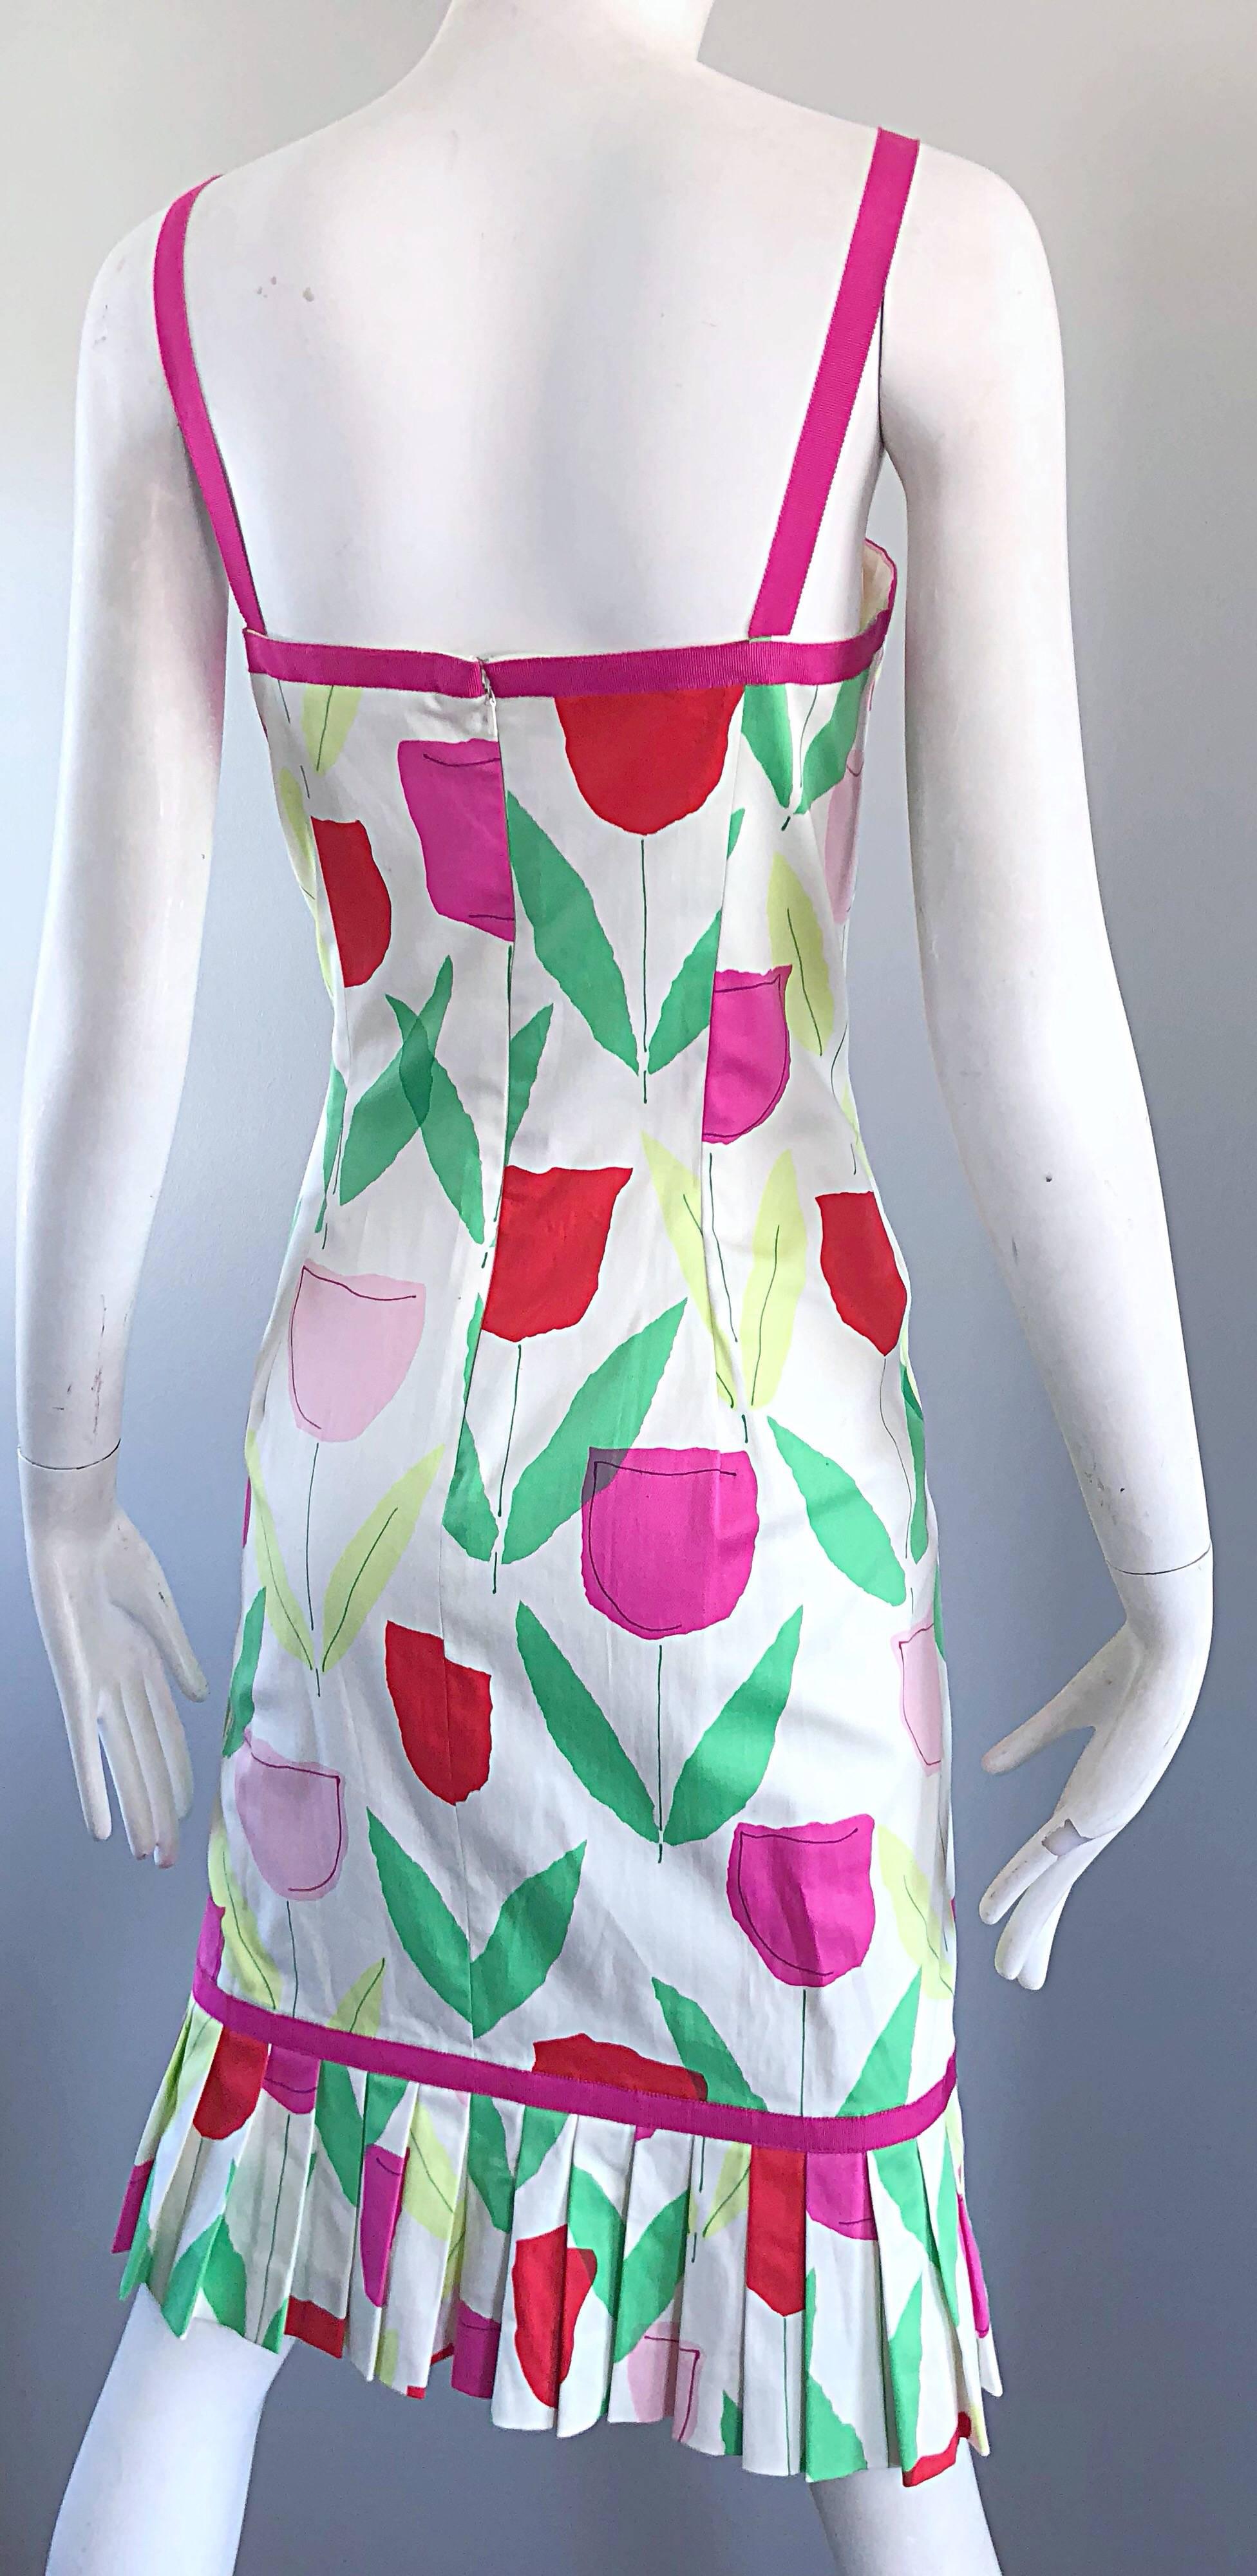 1990s Moschino Cheap & Chic Pink + Red + Green Tulip / Rose Print Vintage Dress 3